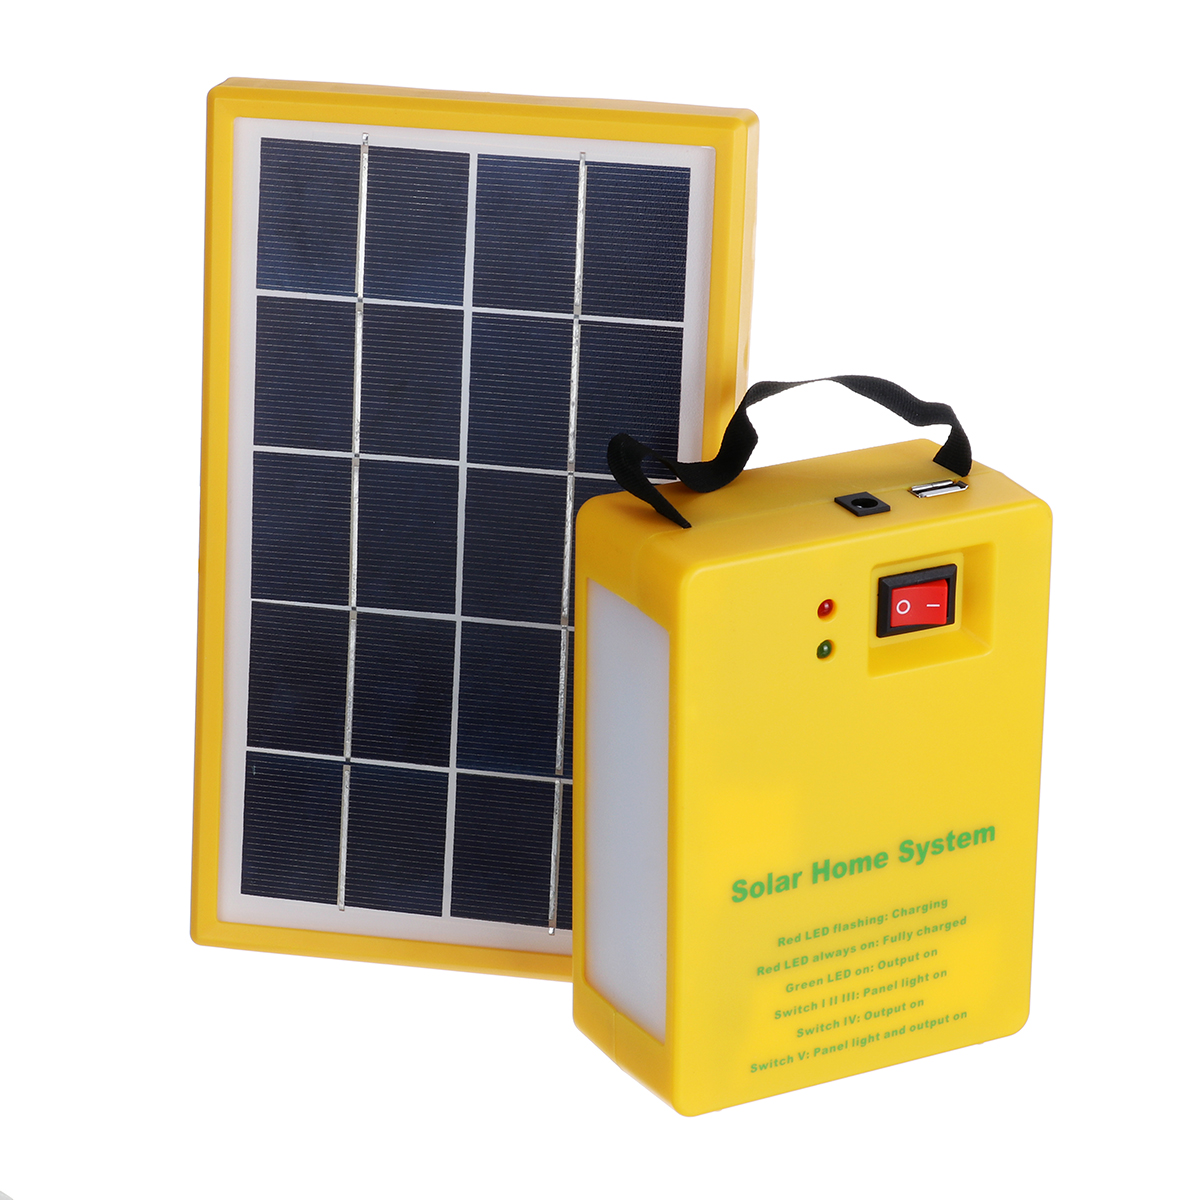 Solar-Panel-Power-Generator-Kit-5V-USB-Charger-Home-Outdoor-System-with-2-LED-Bulbs-Light-1498090-5